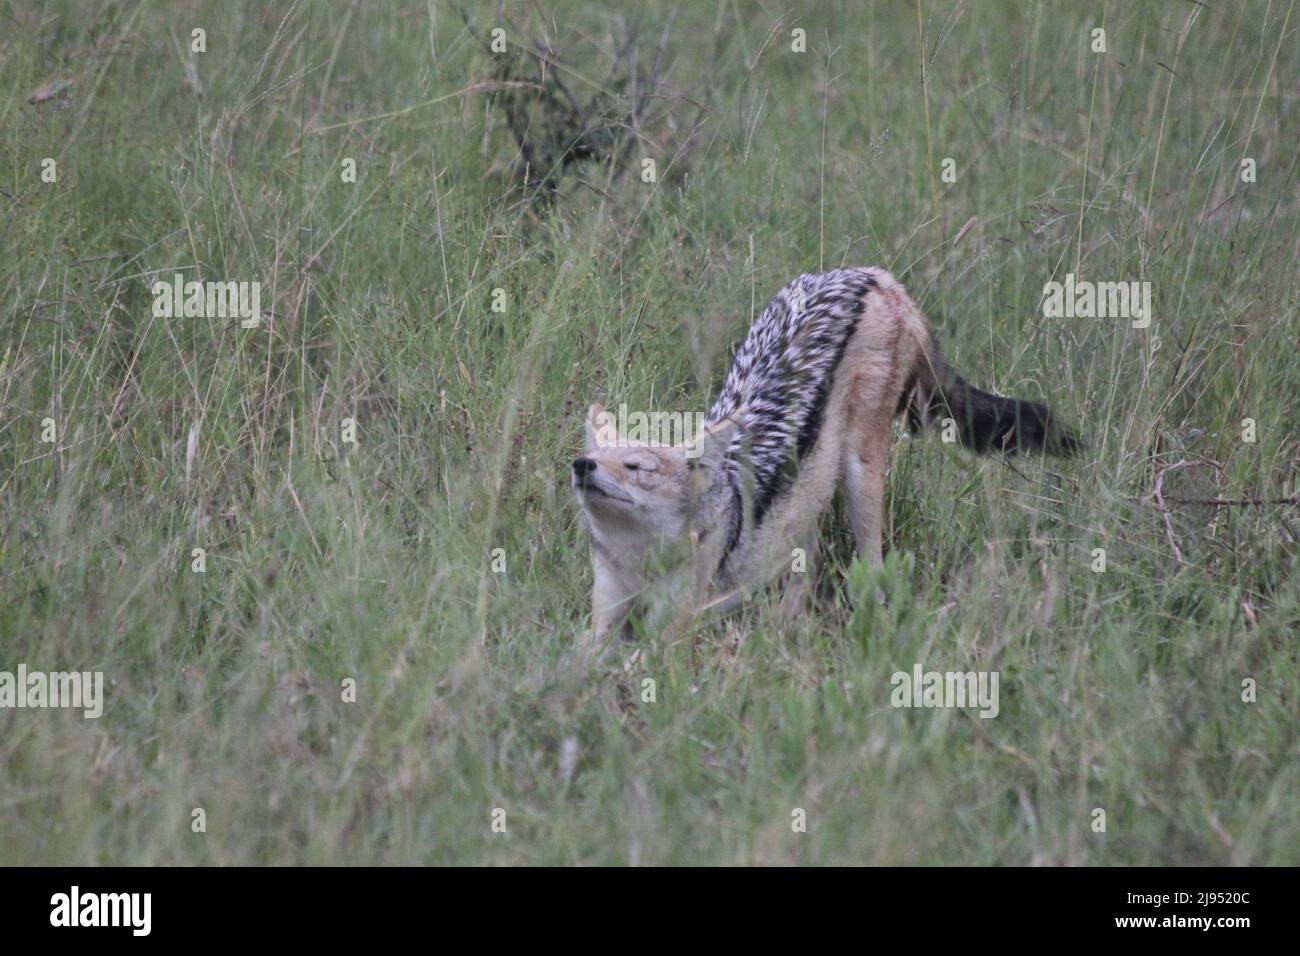 A lonely jackal in the open fields of the savanna, getting ready for the day. Stock Photo